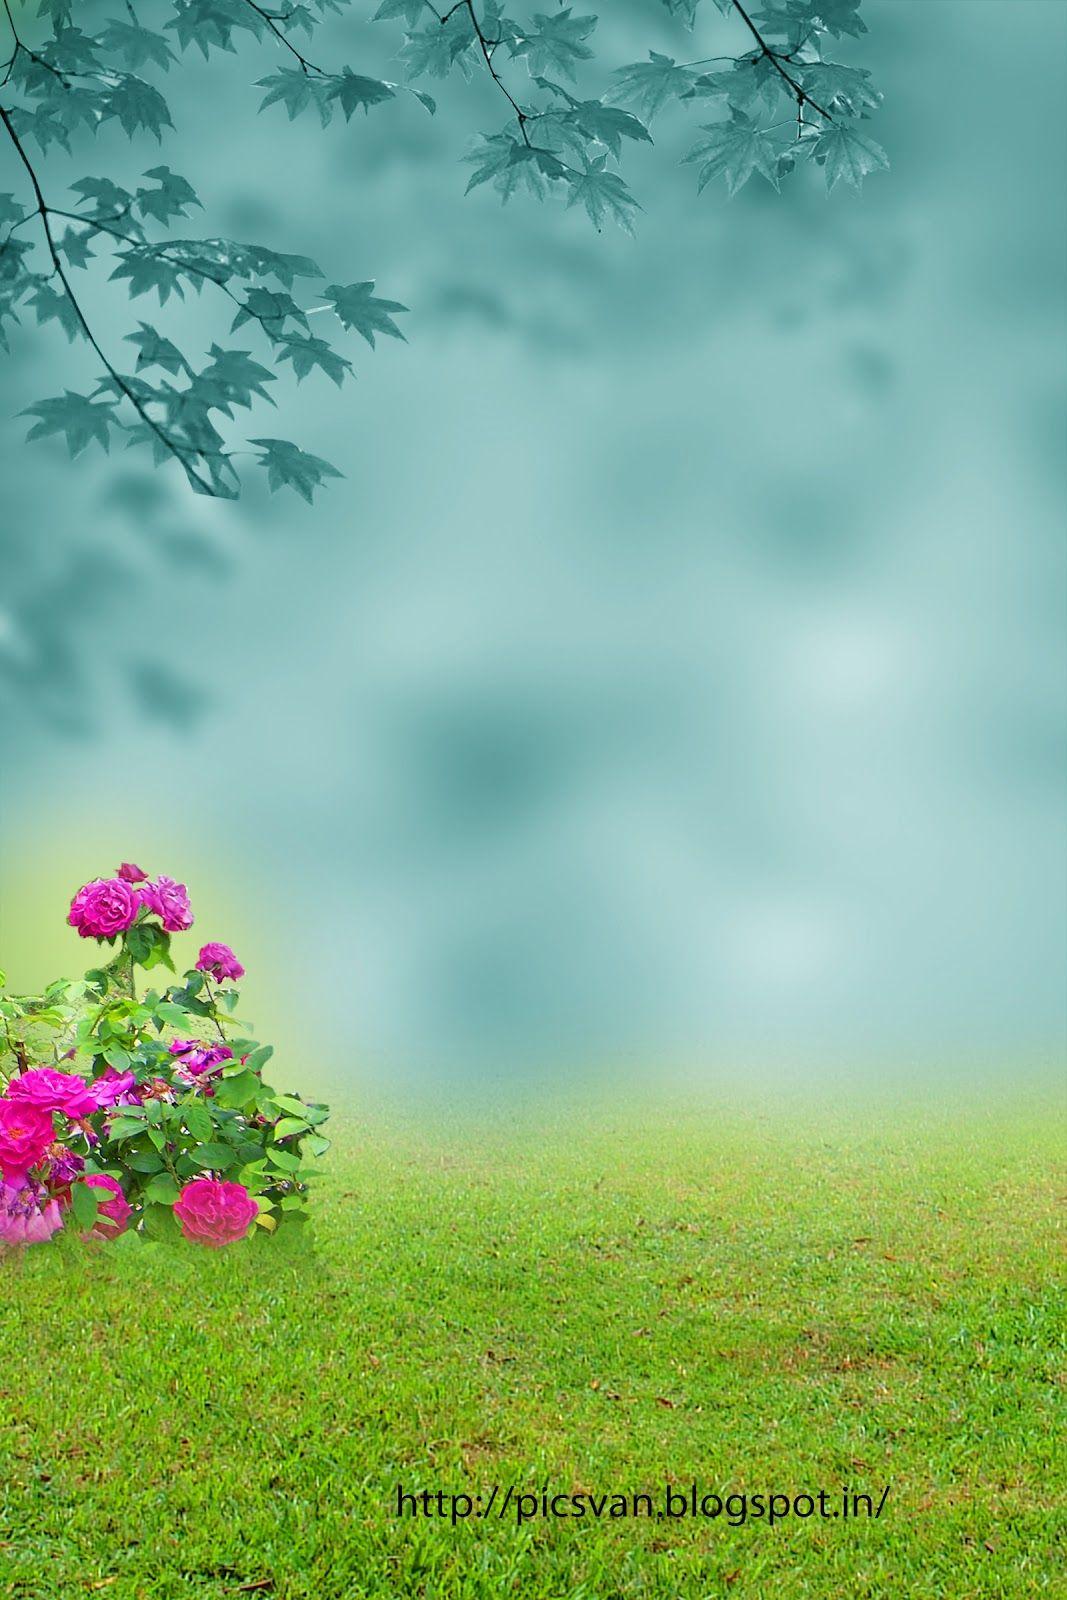 background hd images for photoshop free download